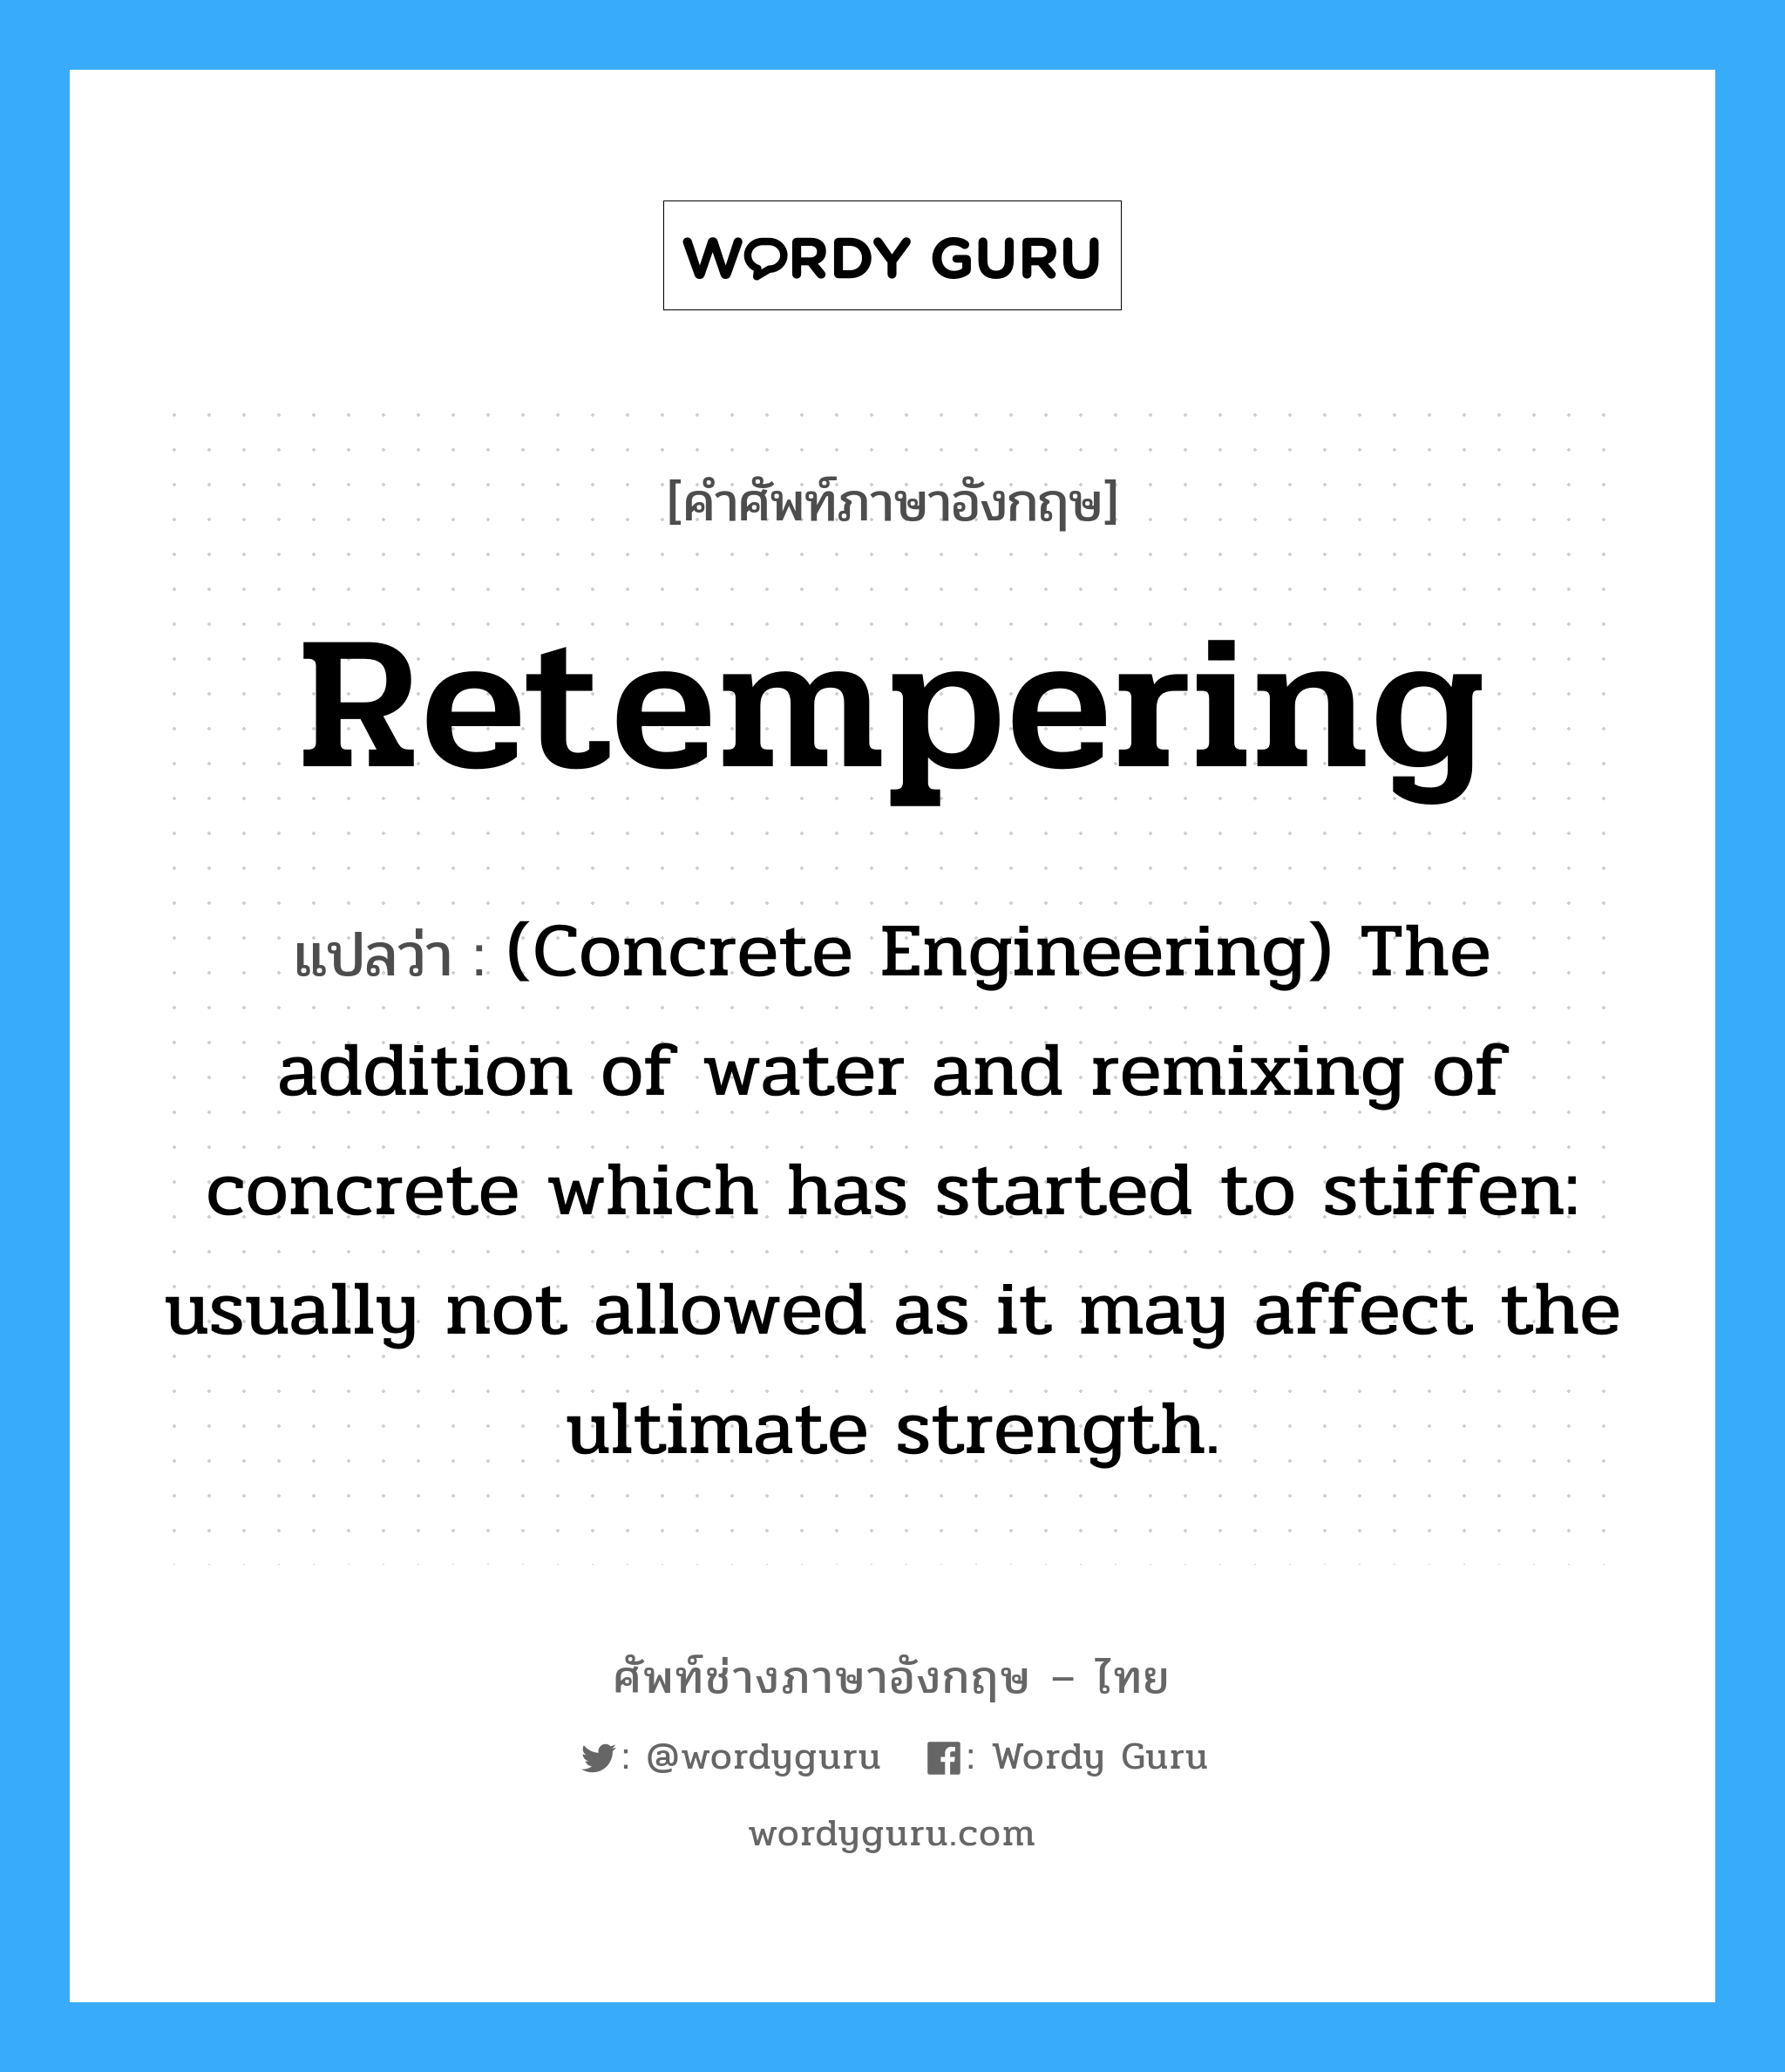 (Concrete Engineering) The addition of water and remixing of concrete which has started to stiffen: usually not allowed as it may affect the ultimate strength. ภาษาอังกฤษ?, คำศัพท์ช่างภาษาอังกฤษ - ไทย (Concrete Engineering) The addition of water and remixing of concrete which has started to stiffen: usually not allowed as it may affect the ultimate strength. คำศัพท์ภาษาอังกฤษ (Concrete Engineering) The addition of water and remixing of concrete which has started to stiffen: usually not allowed as it may affect the ultimate strength. แปลว่า Retempering